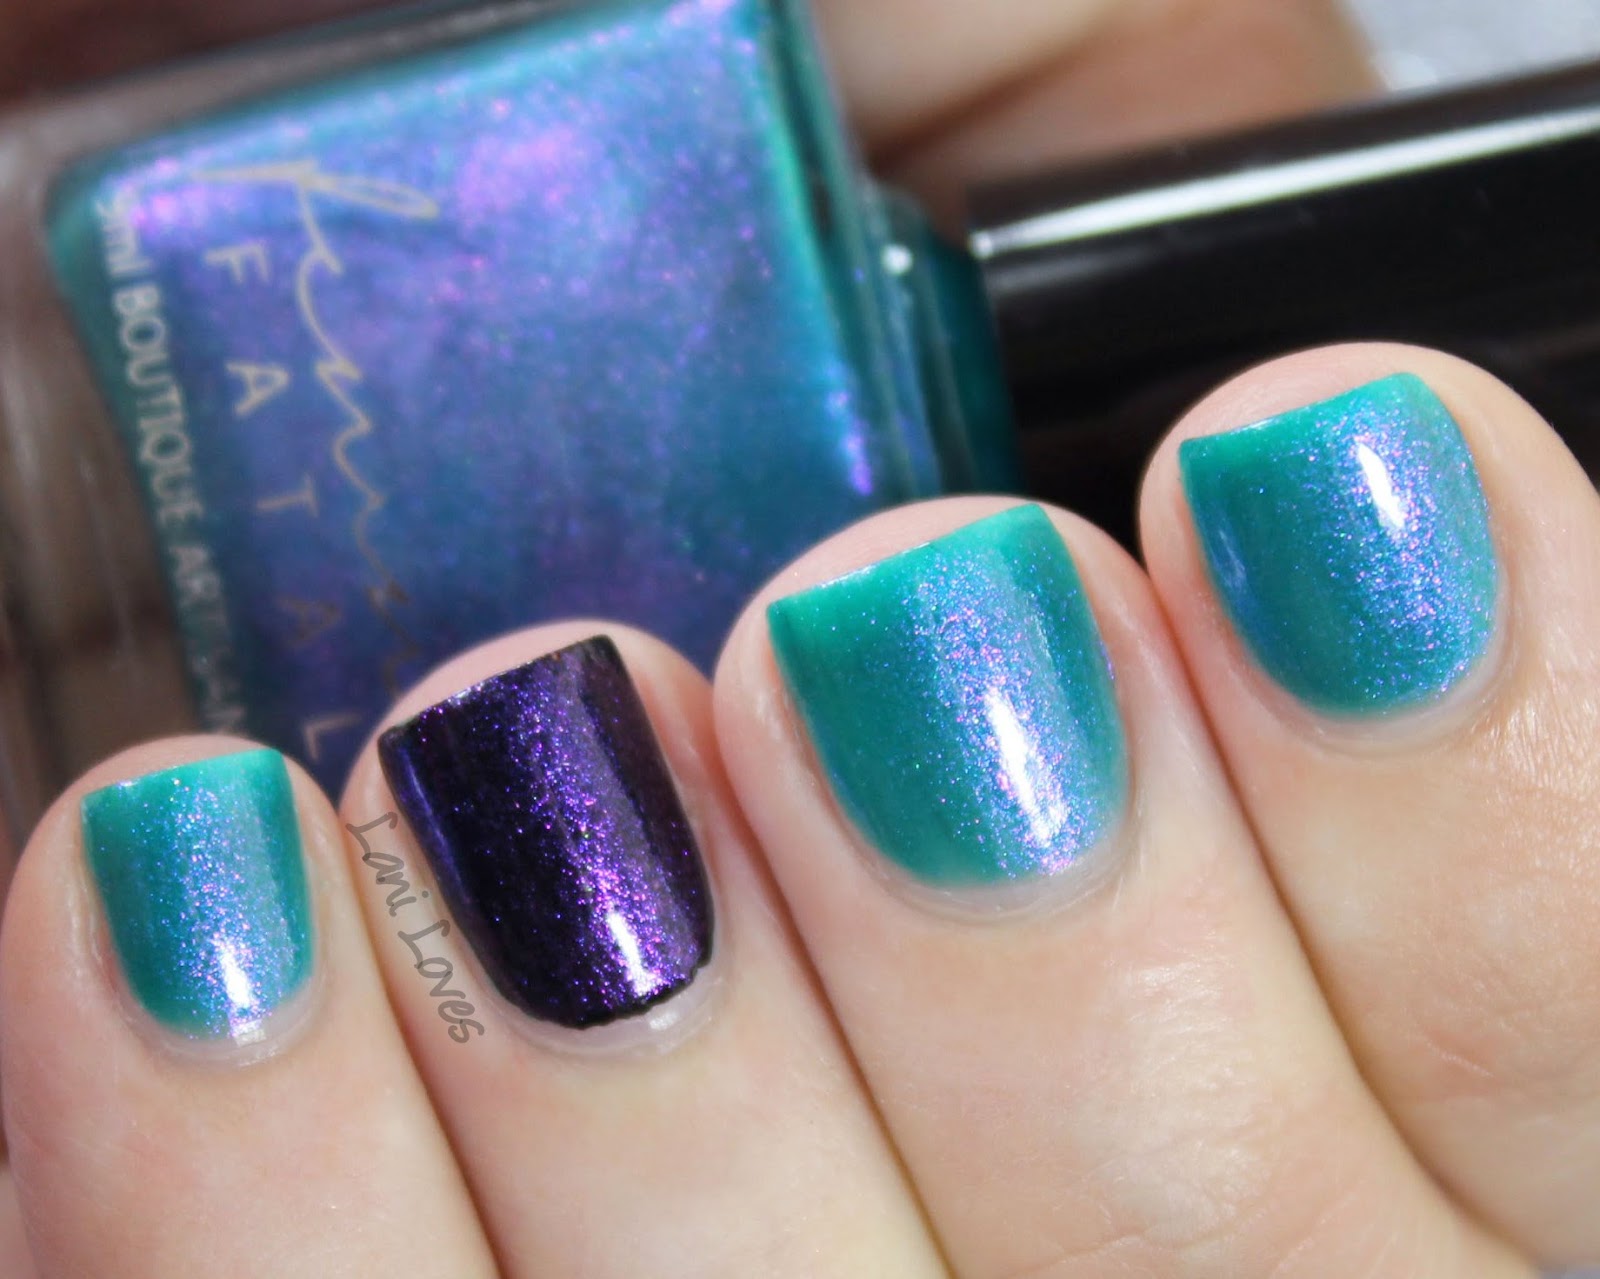 Femme Fatale Cosmetics - Weed in Her Heart nail polish swatches & review